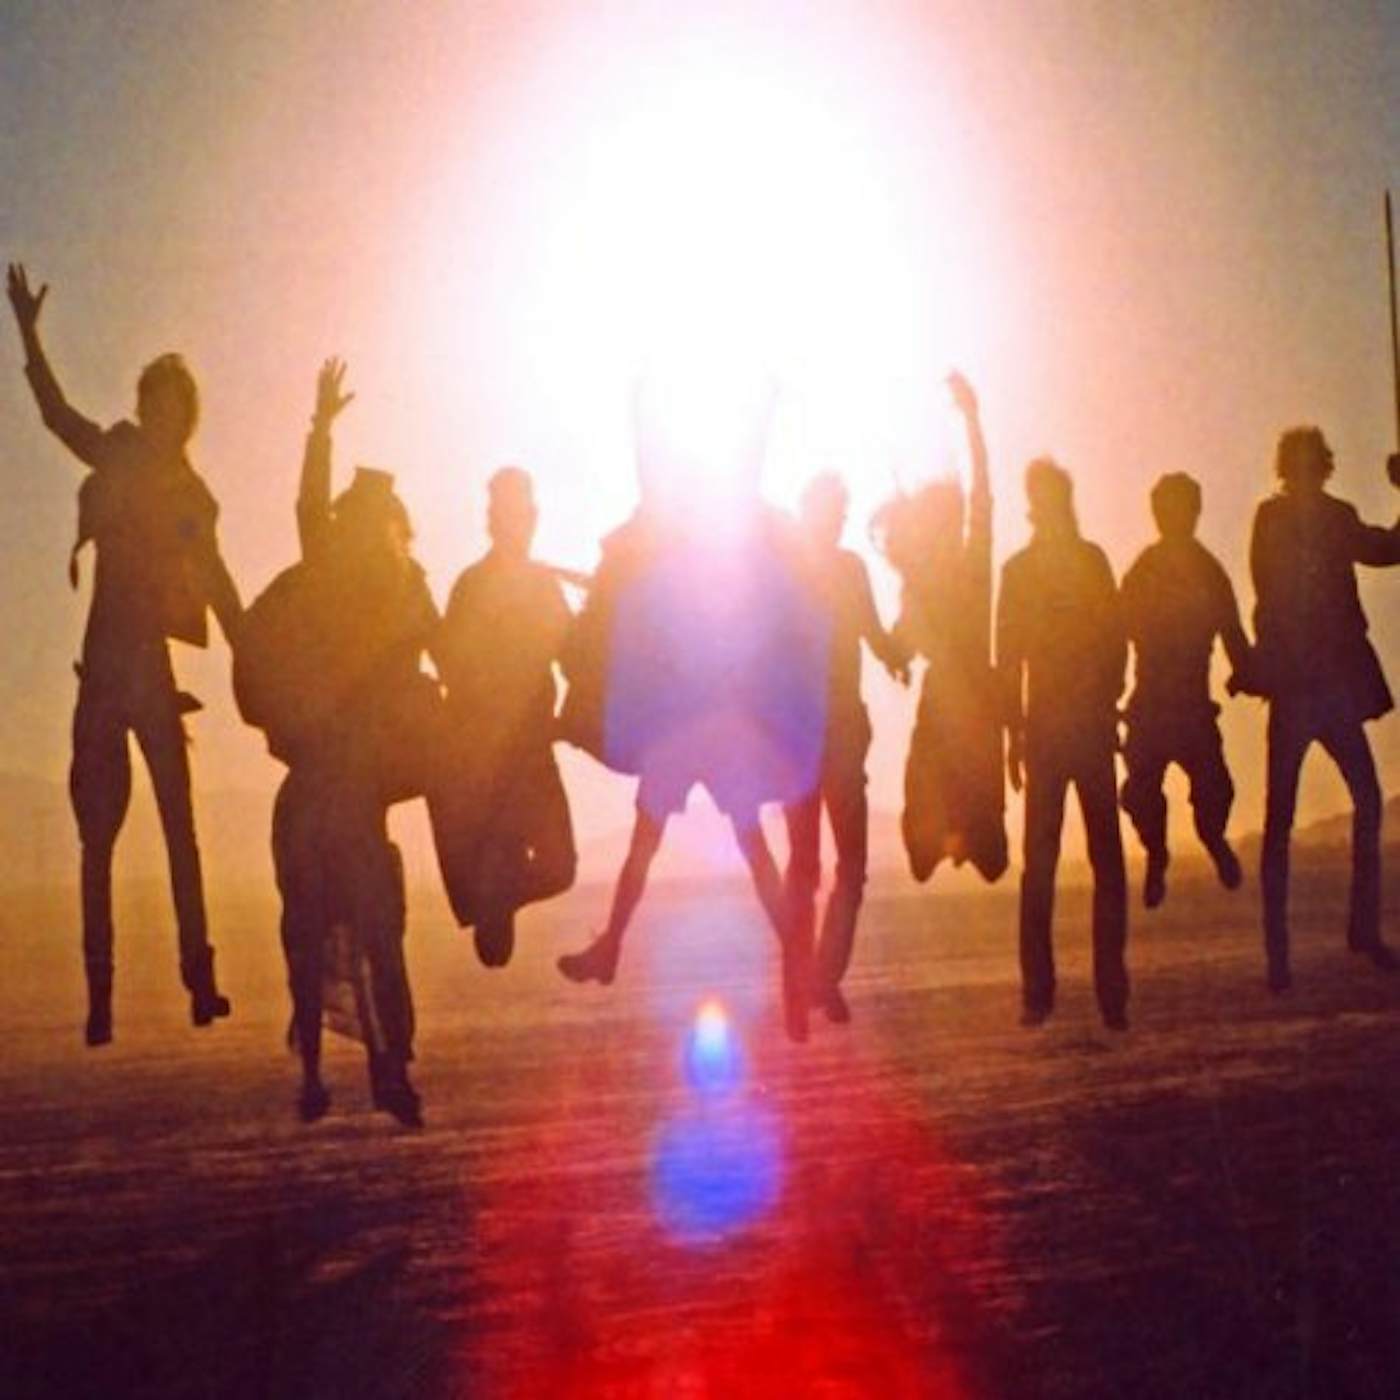 Edward Sharpe & The Magnetic Zeros Up From Below Vinyl Record